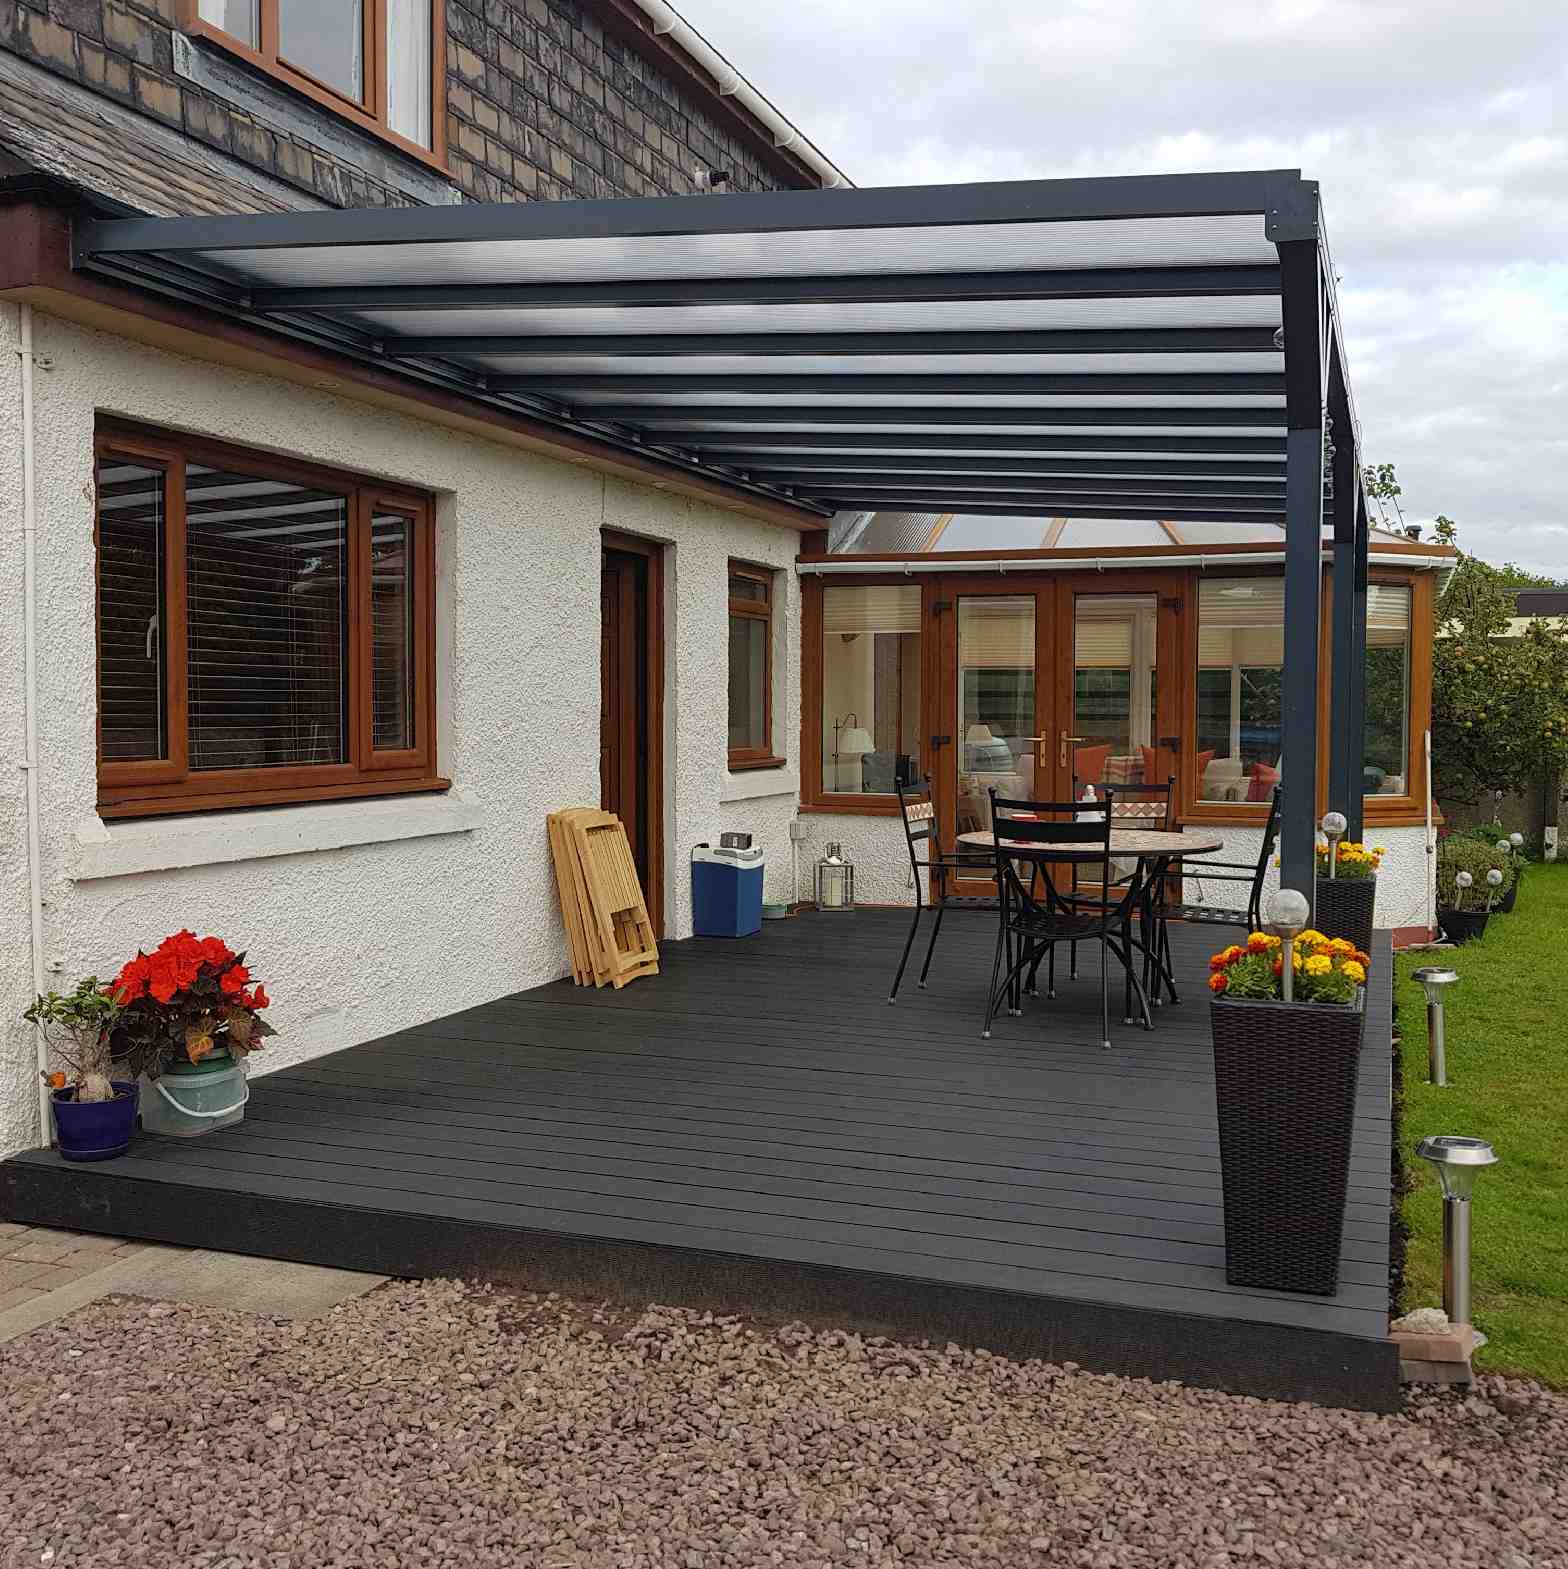 Buy Omega Verandah, Anthracite Grey, 16mm Polycarbonate Glazing - 5.2m (W) x 3.0m (P), (3) Supporting Posts online today